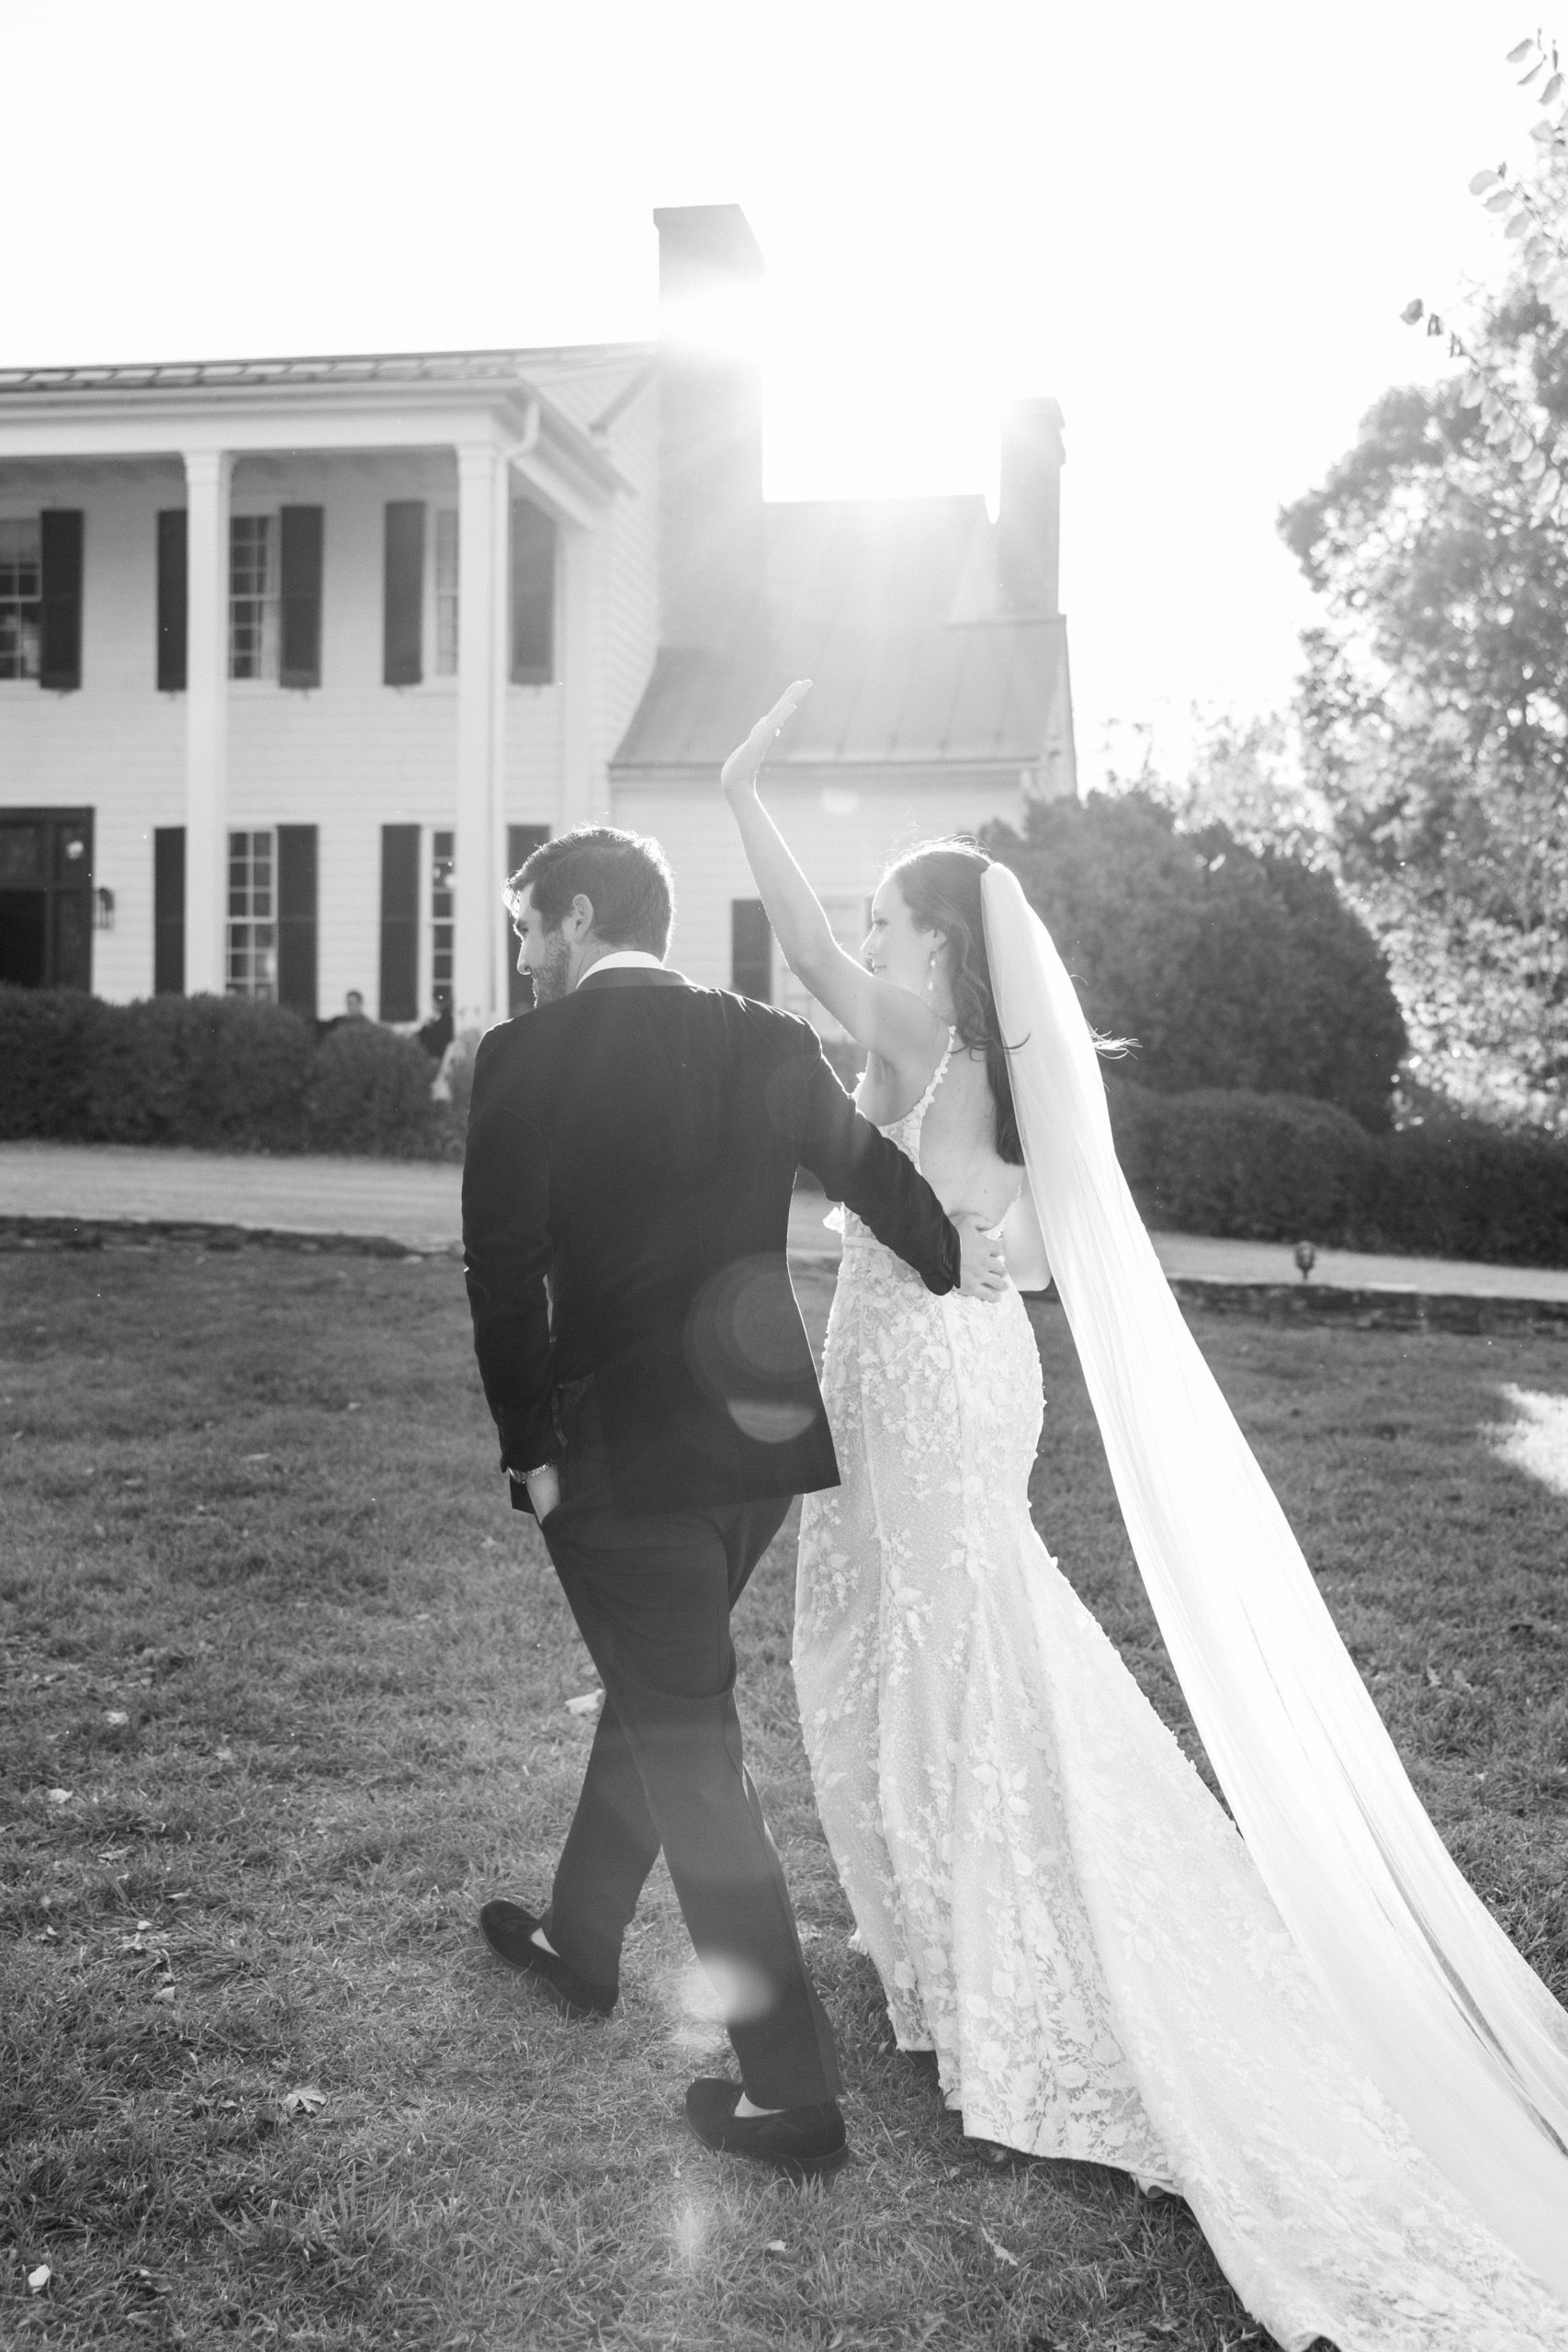 Bride waves and groom has hand on her back as they walk across lawn in front of white house for Clifton wedding photography